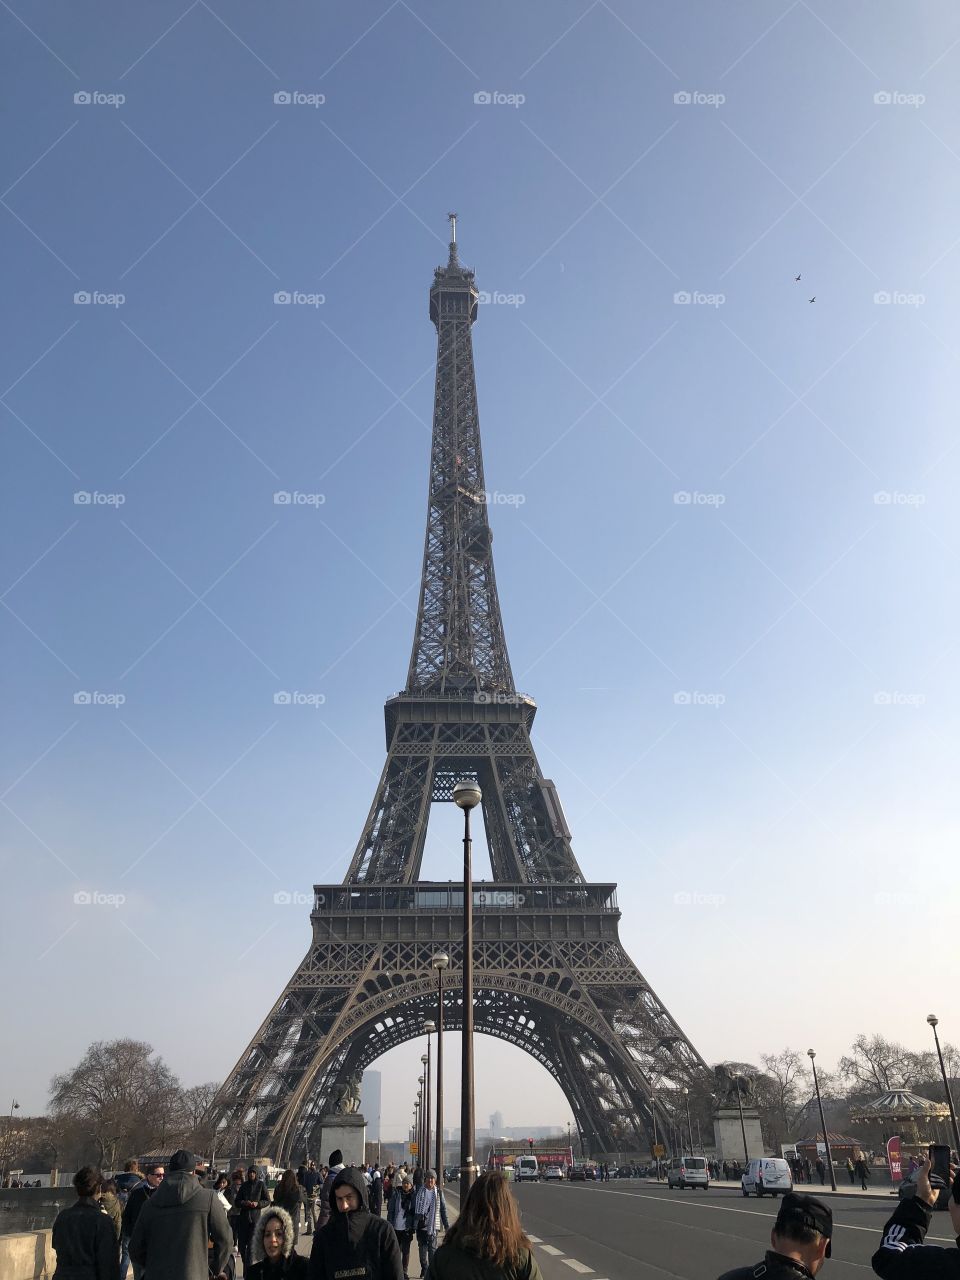 The Eiffel Tower in Paris, France. 